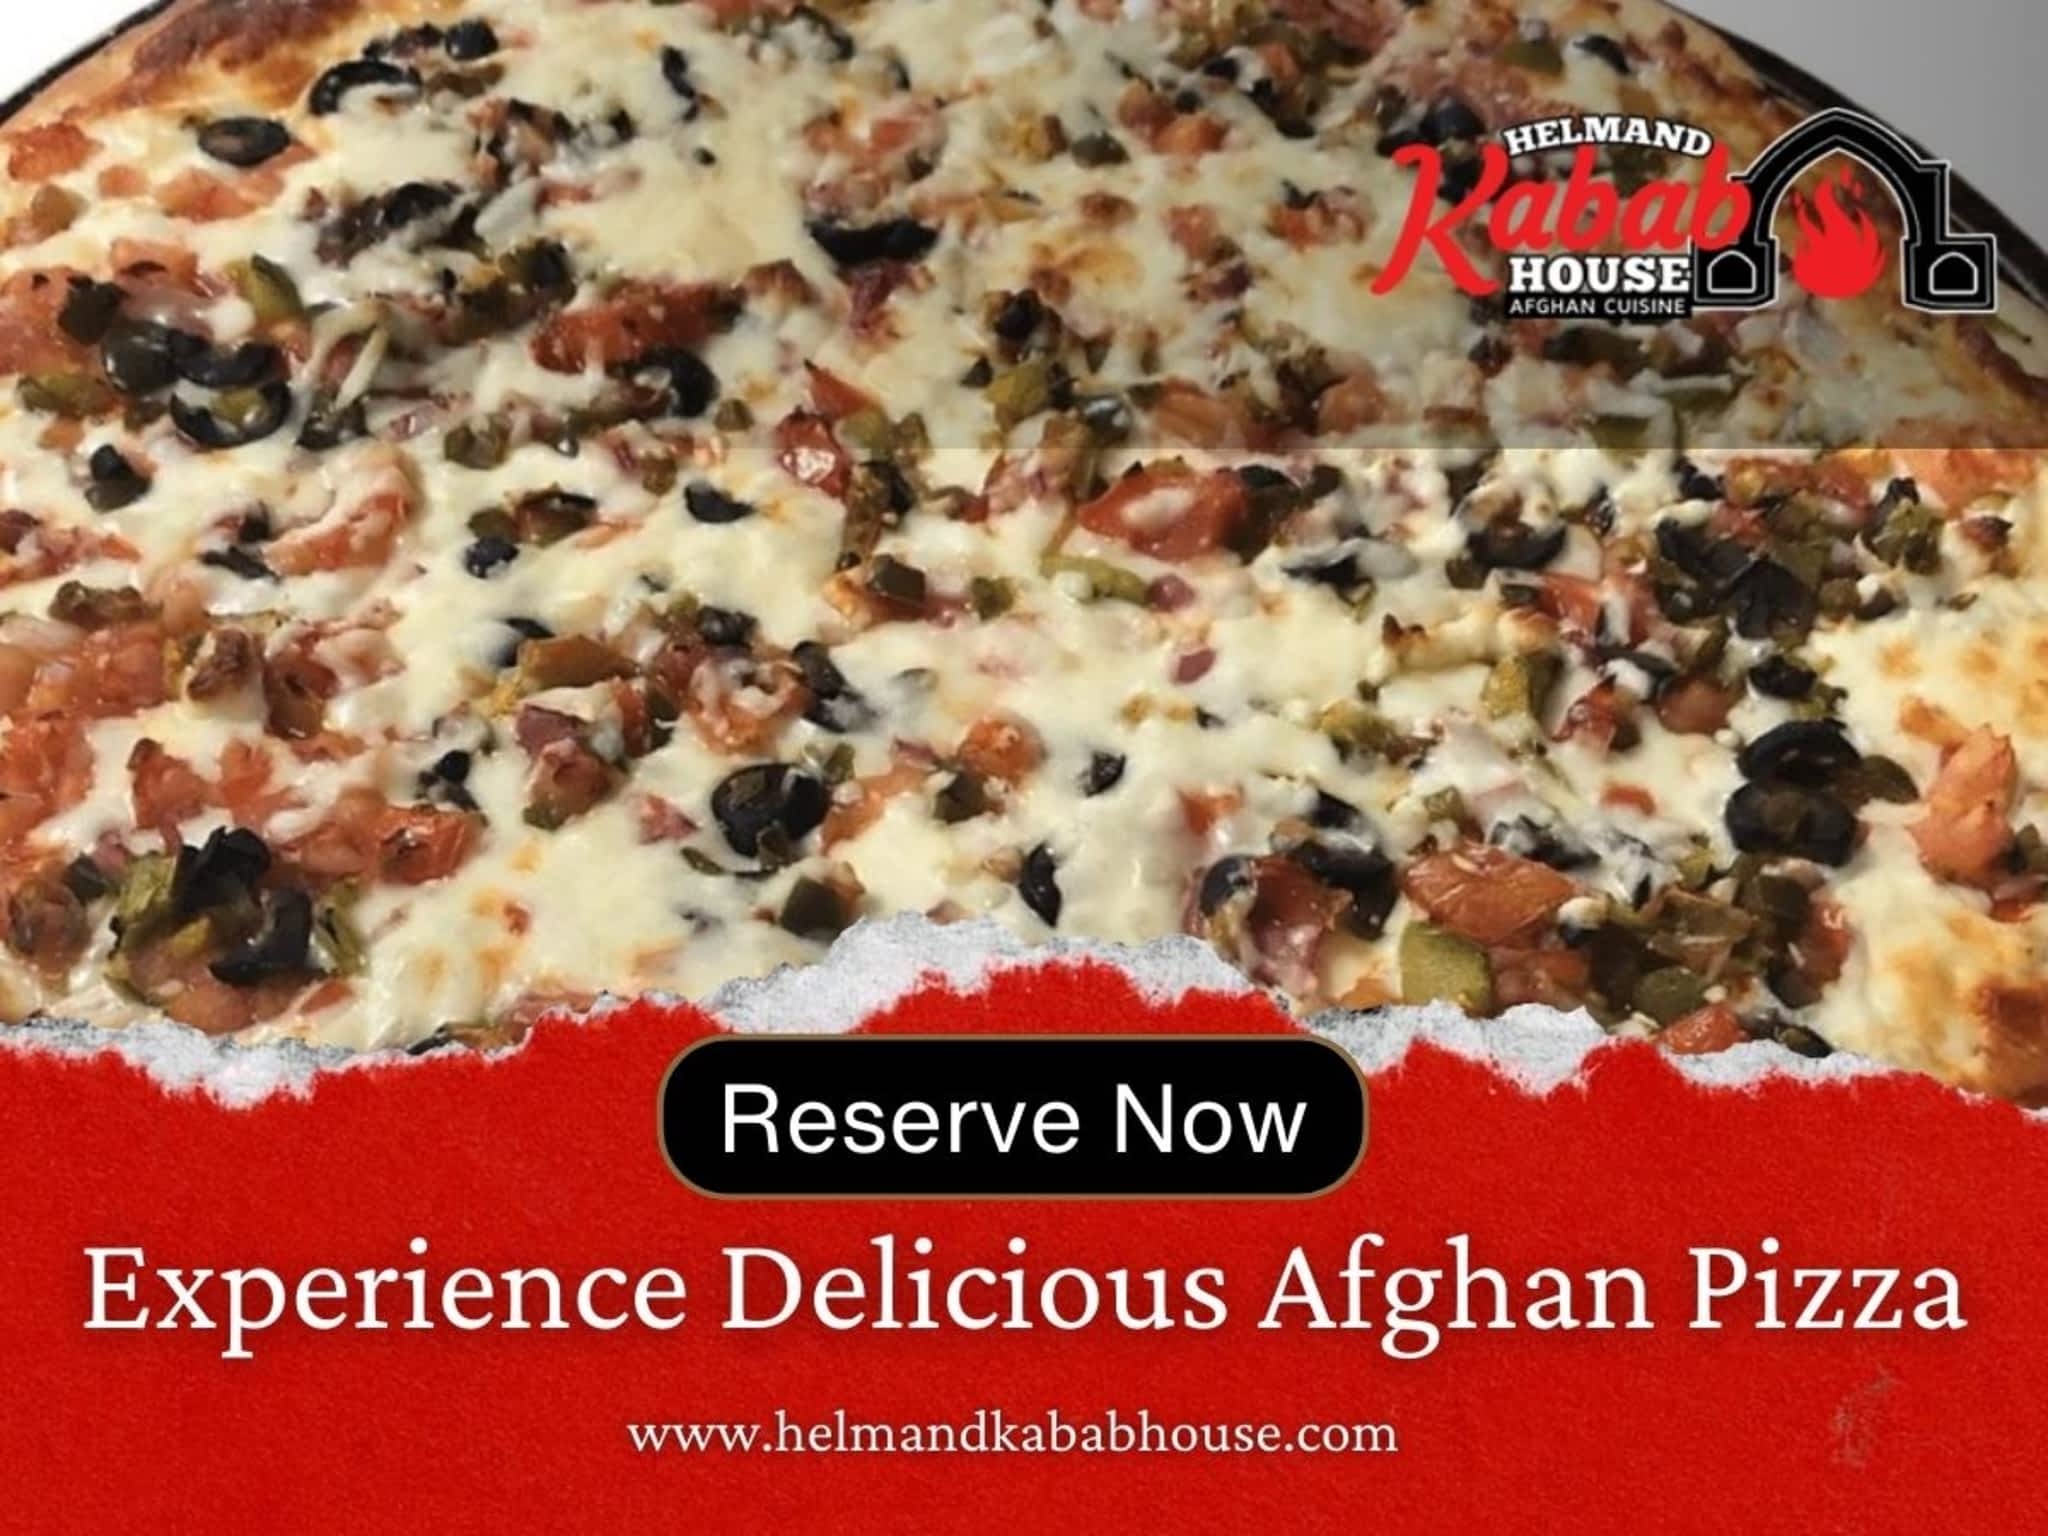 photo Helmand Kabab House - Guelph